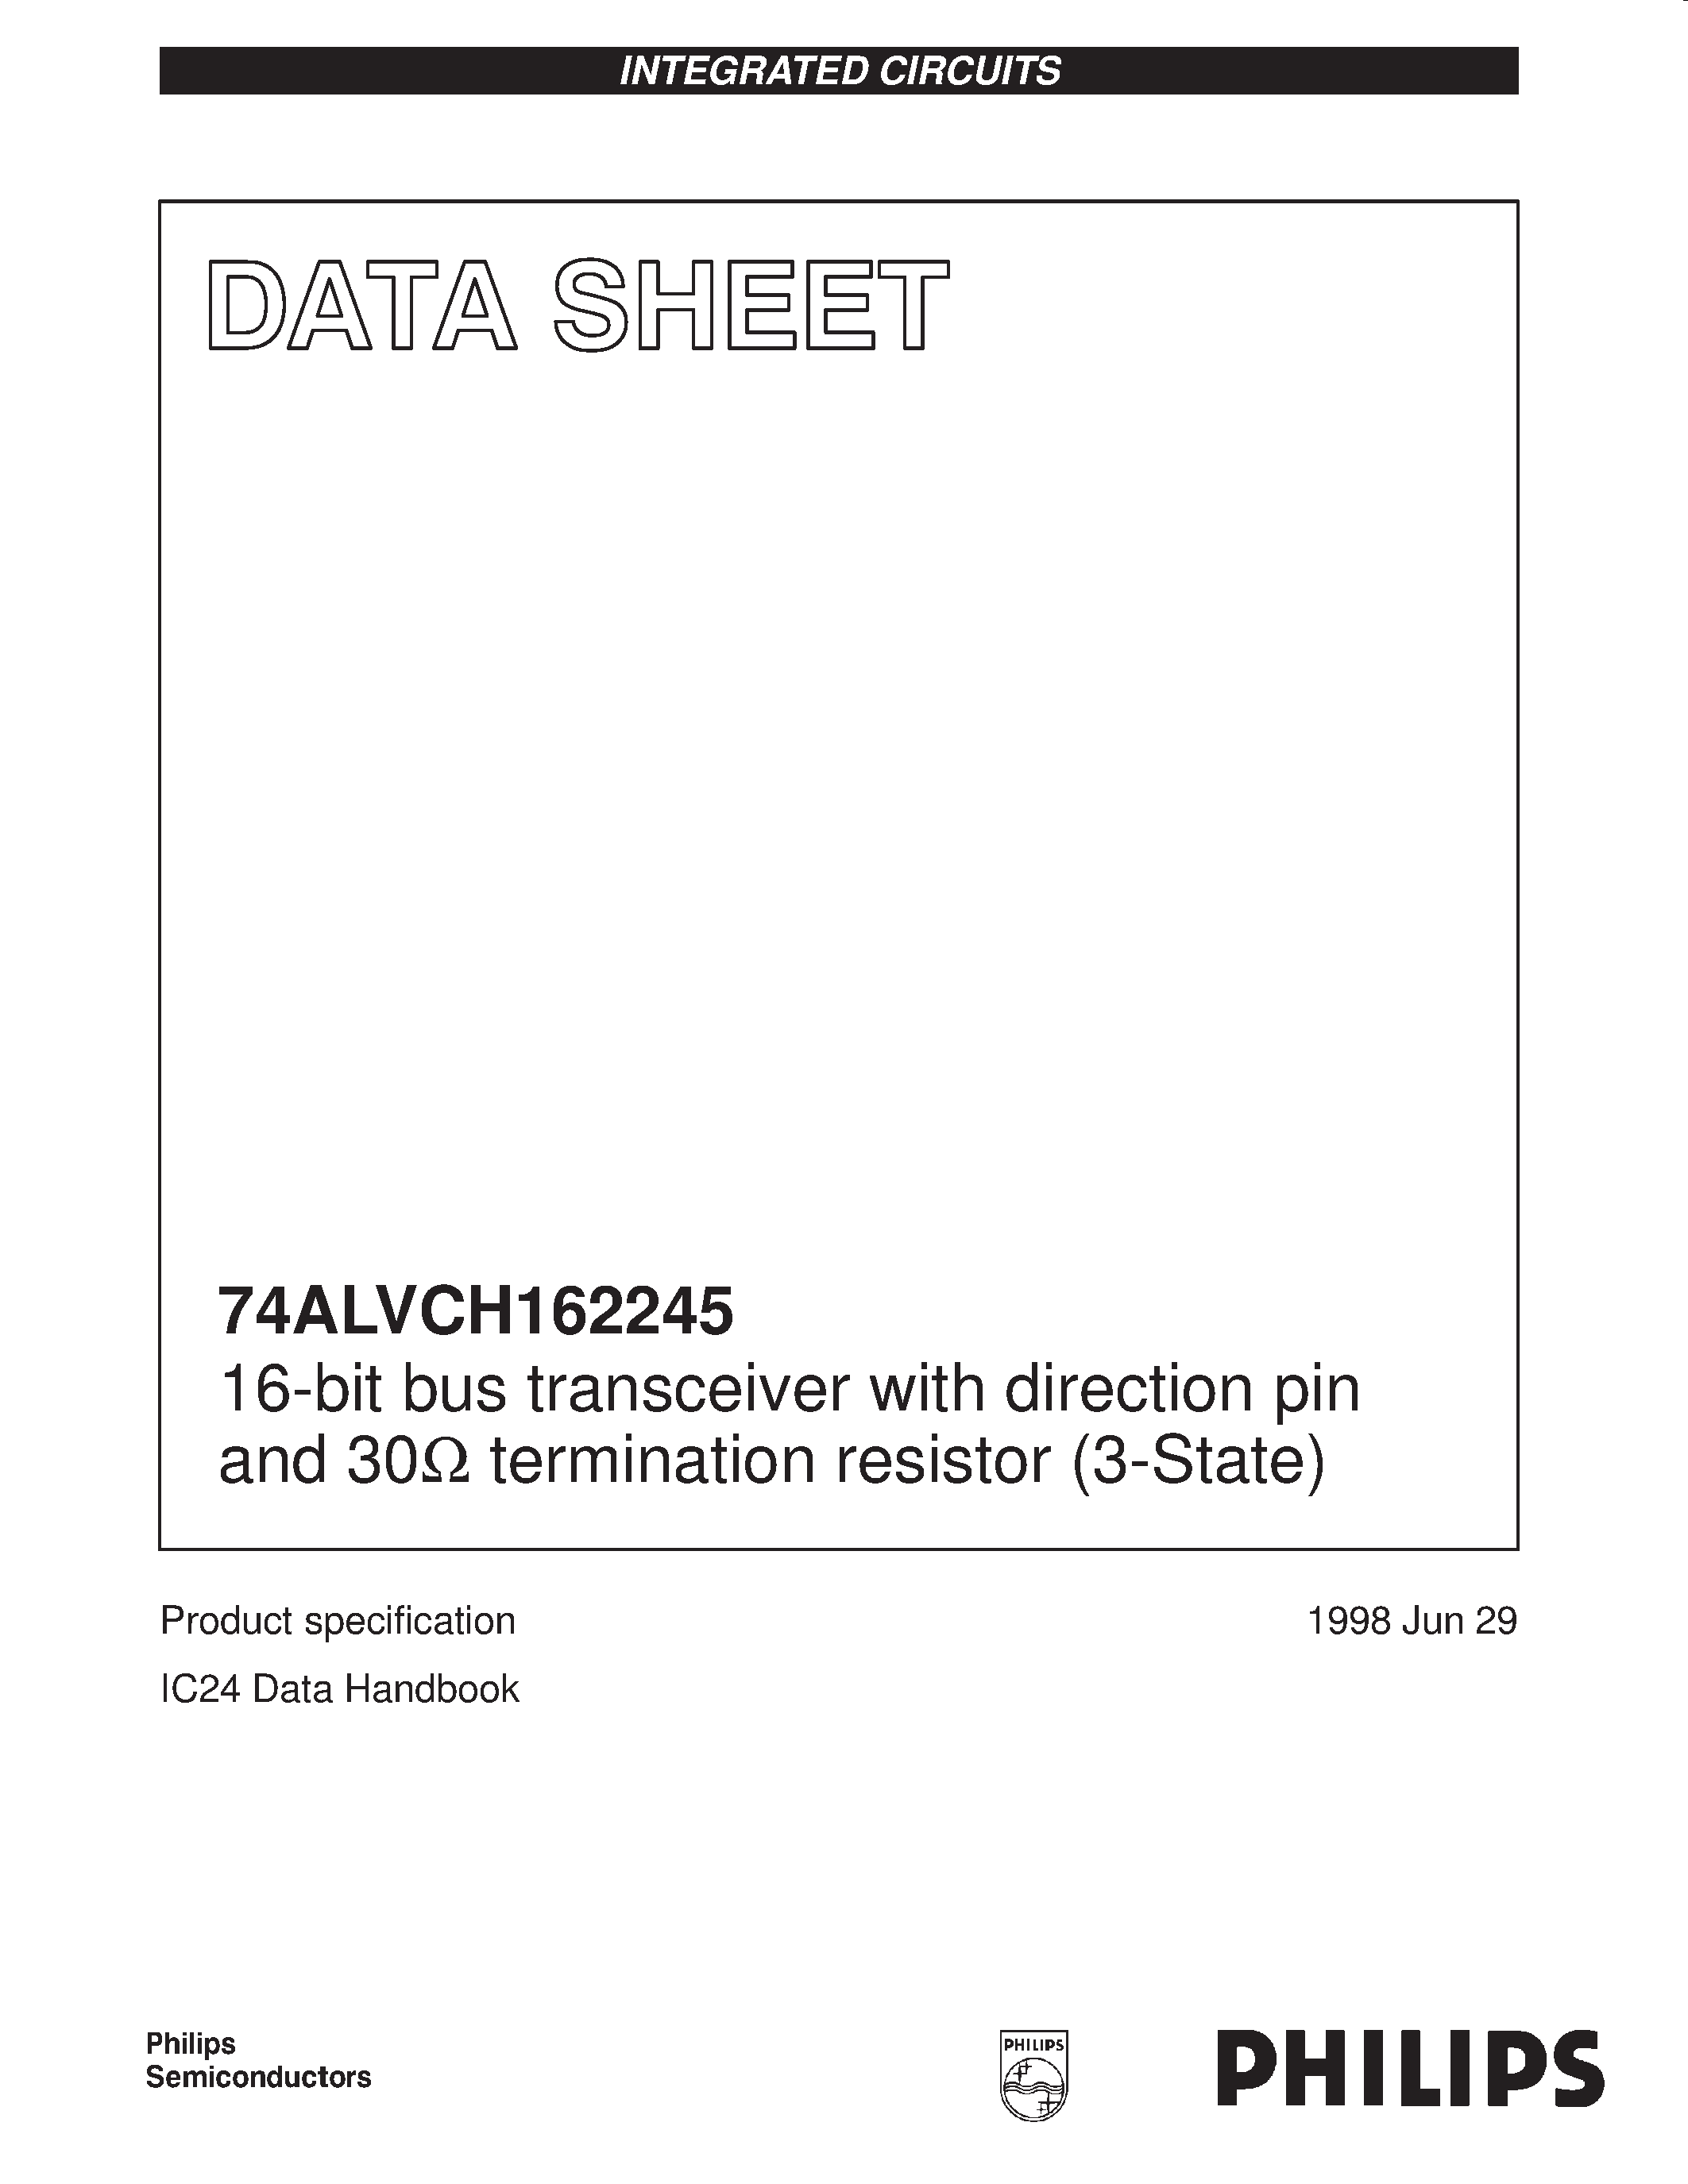 Datasheet 74ALVCH162245DL - 16-bit bus transceiver with direction pin and 30ohm termination resistor 3-State page 1